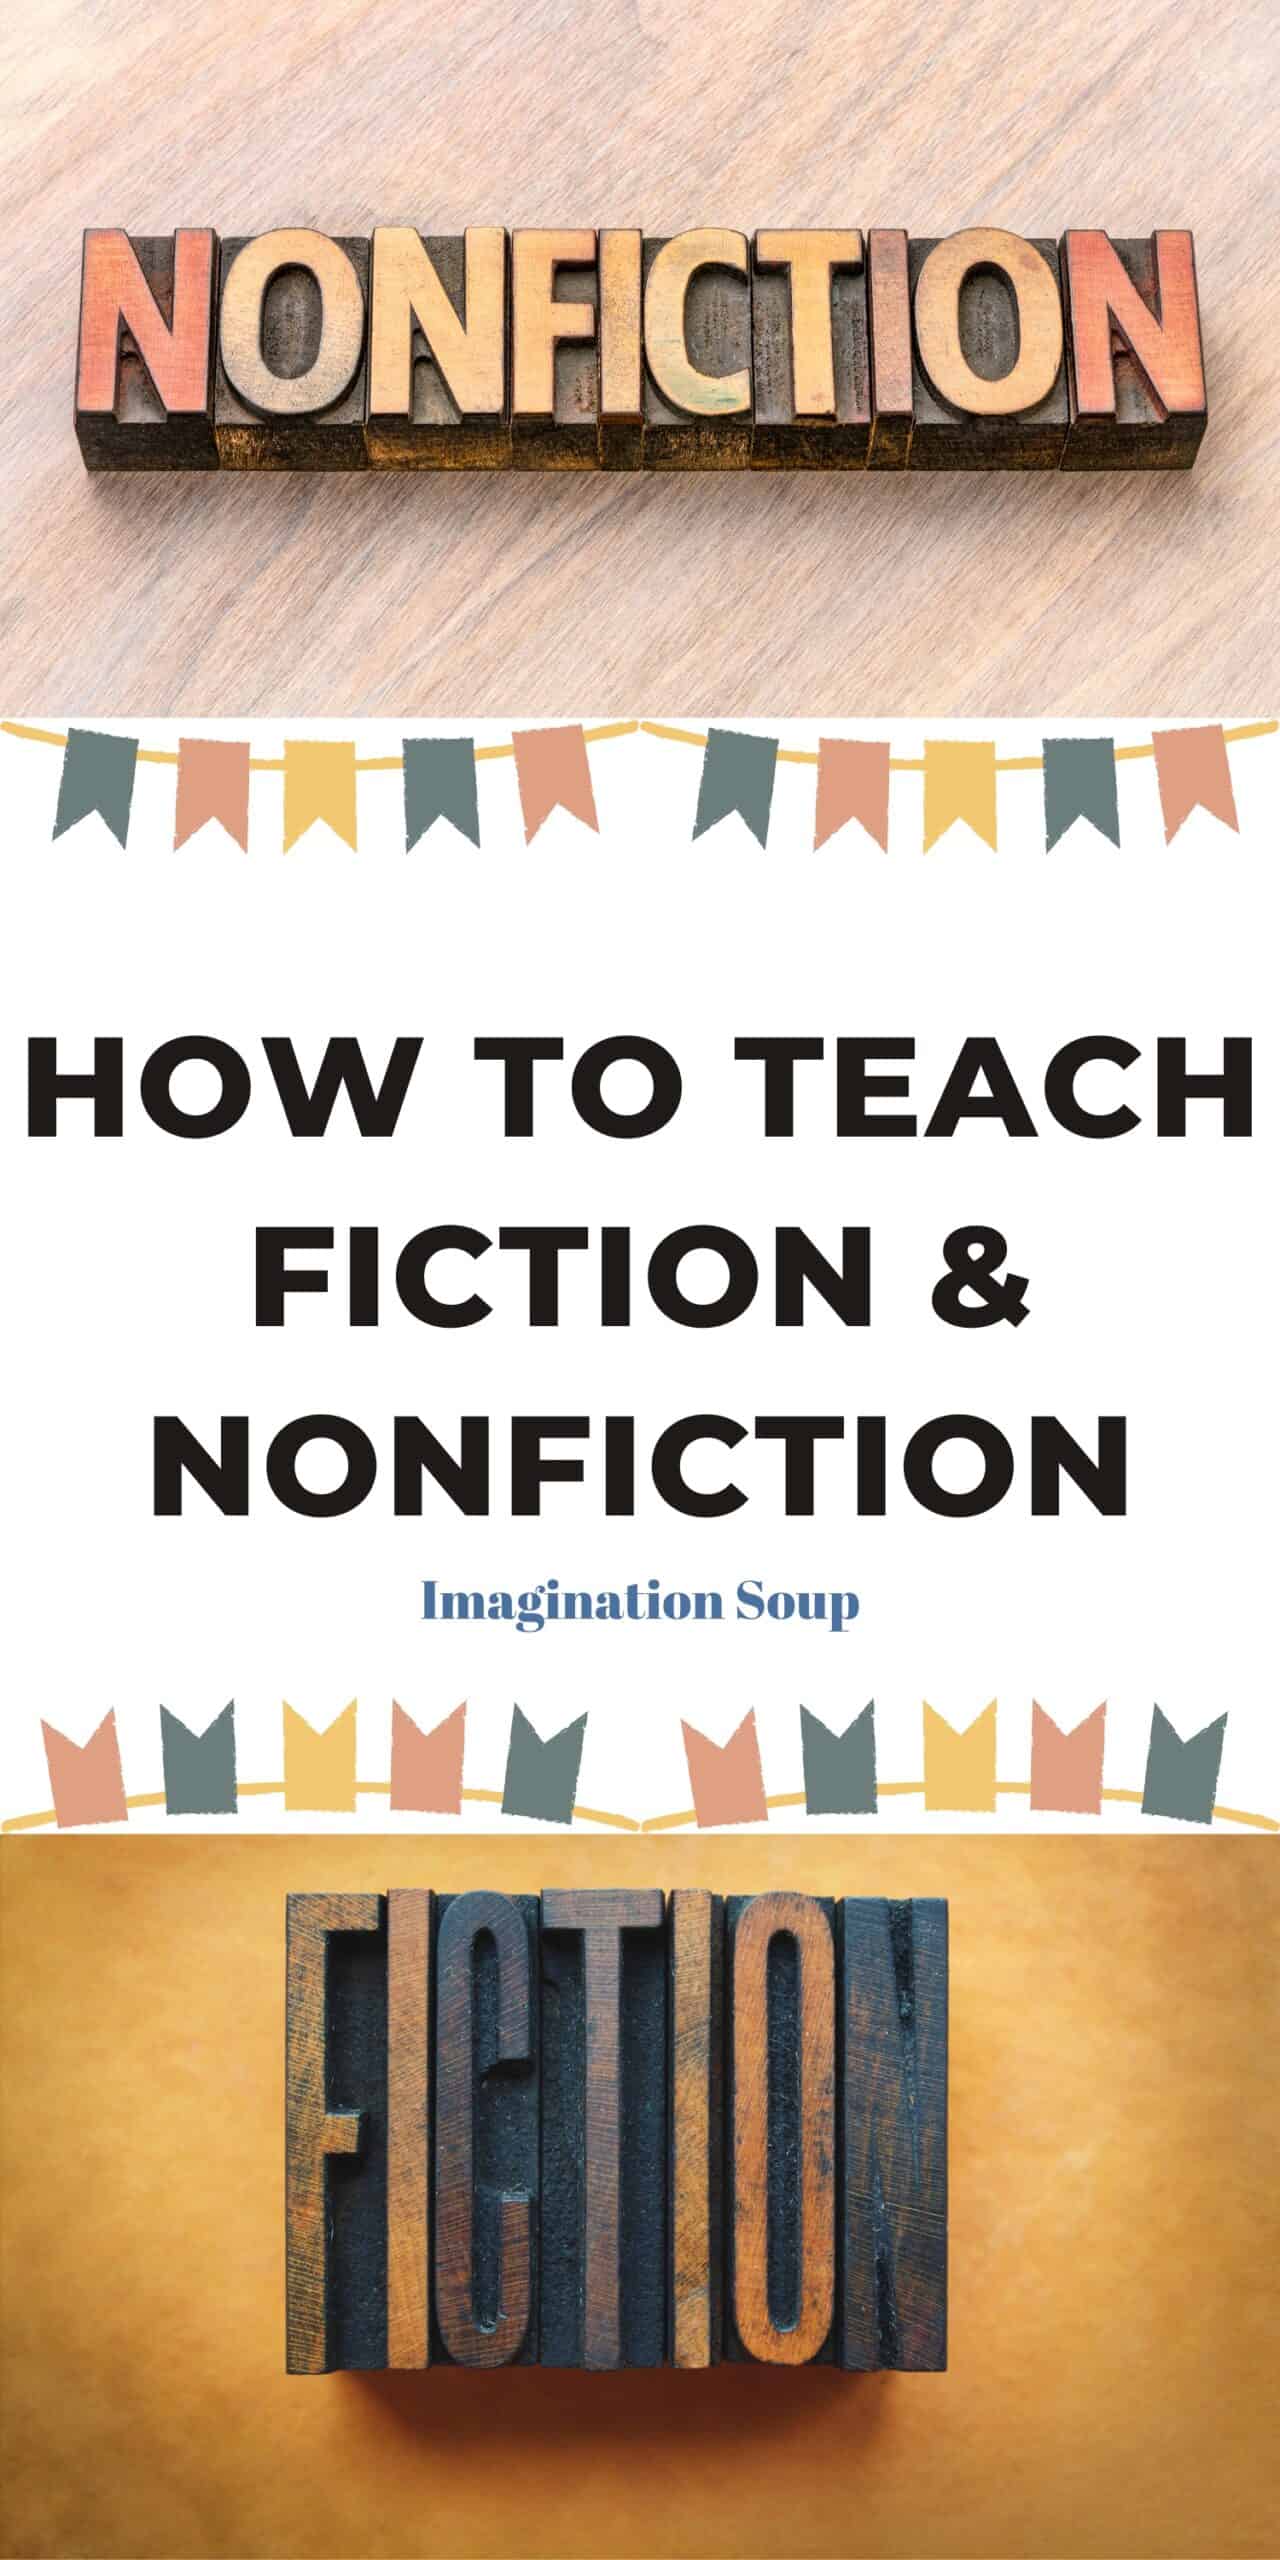 How to Teach Fiction and Nonfiction